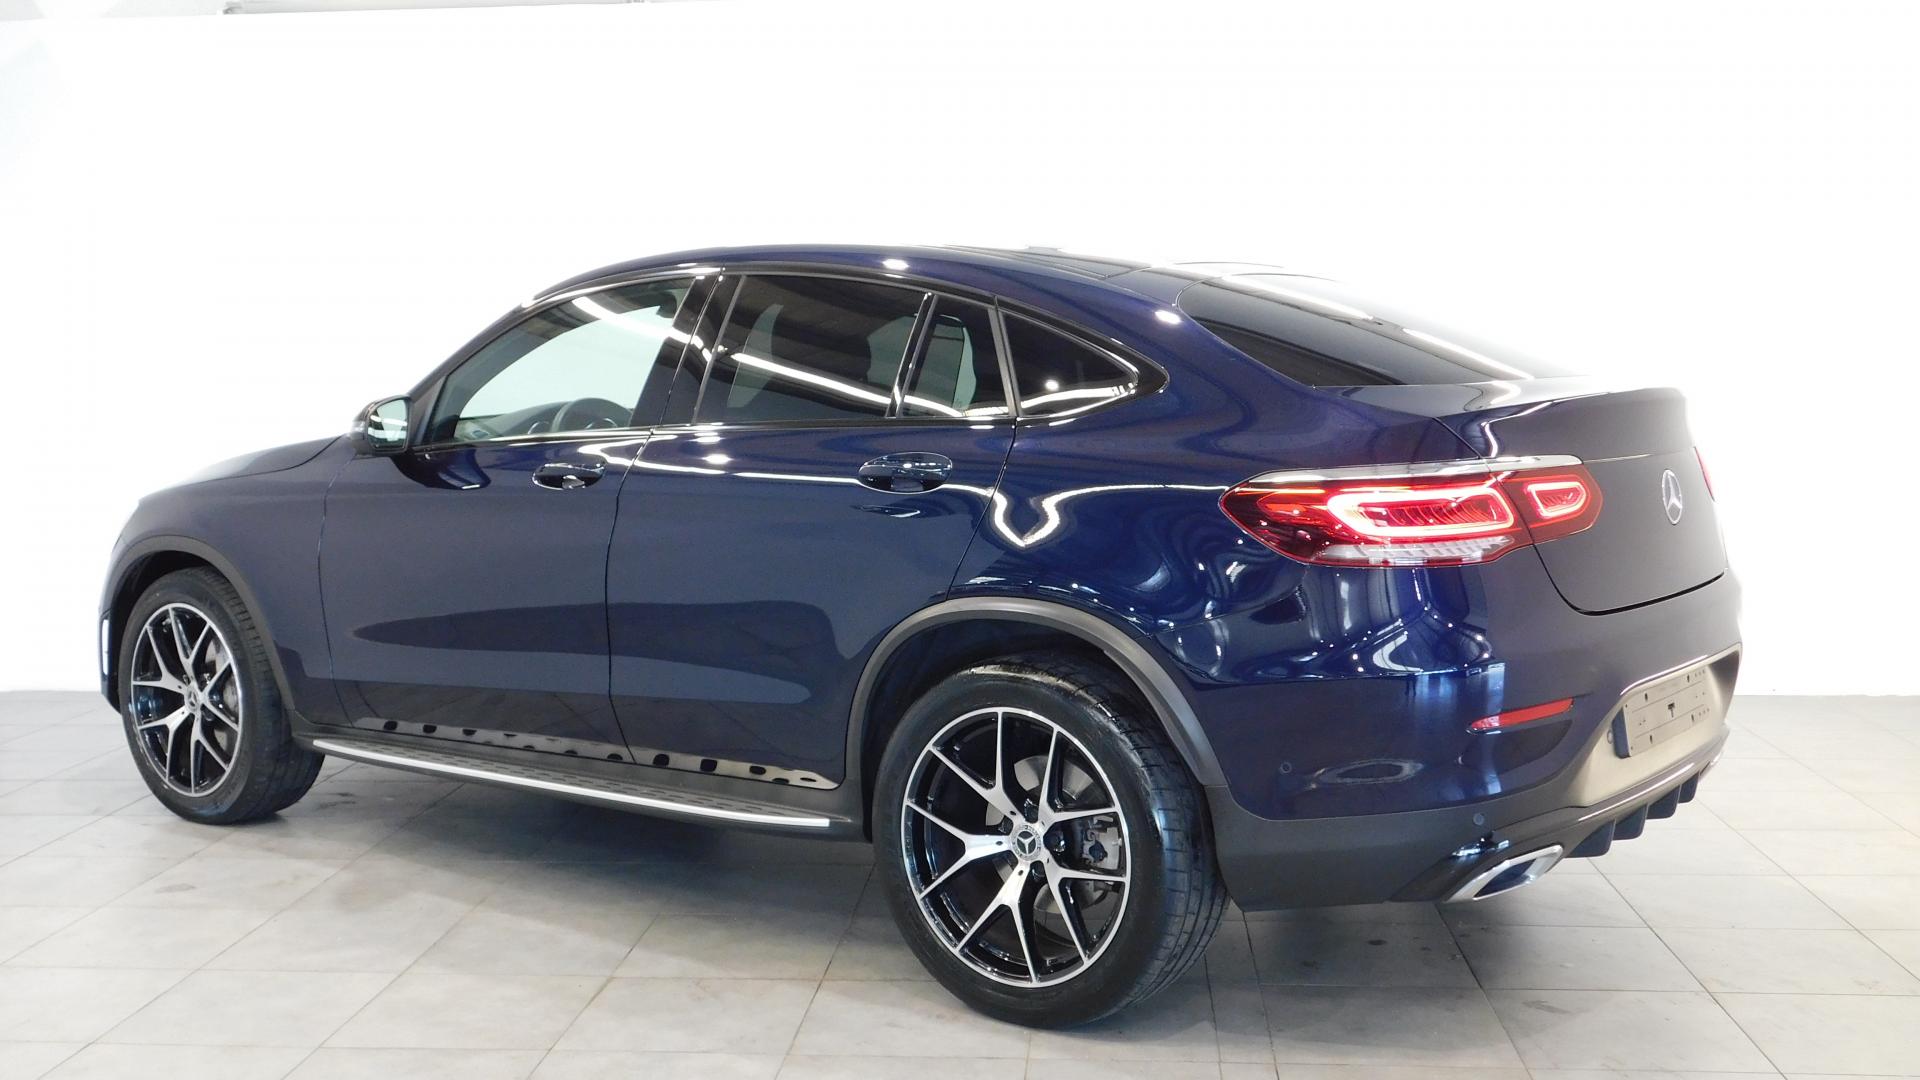 MERCEDES GLC COUPE 220 d - BV 9G-Tronic AMG Line 4-Matic PHASE 2